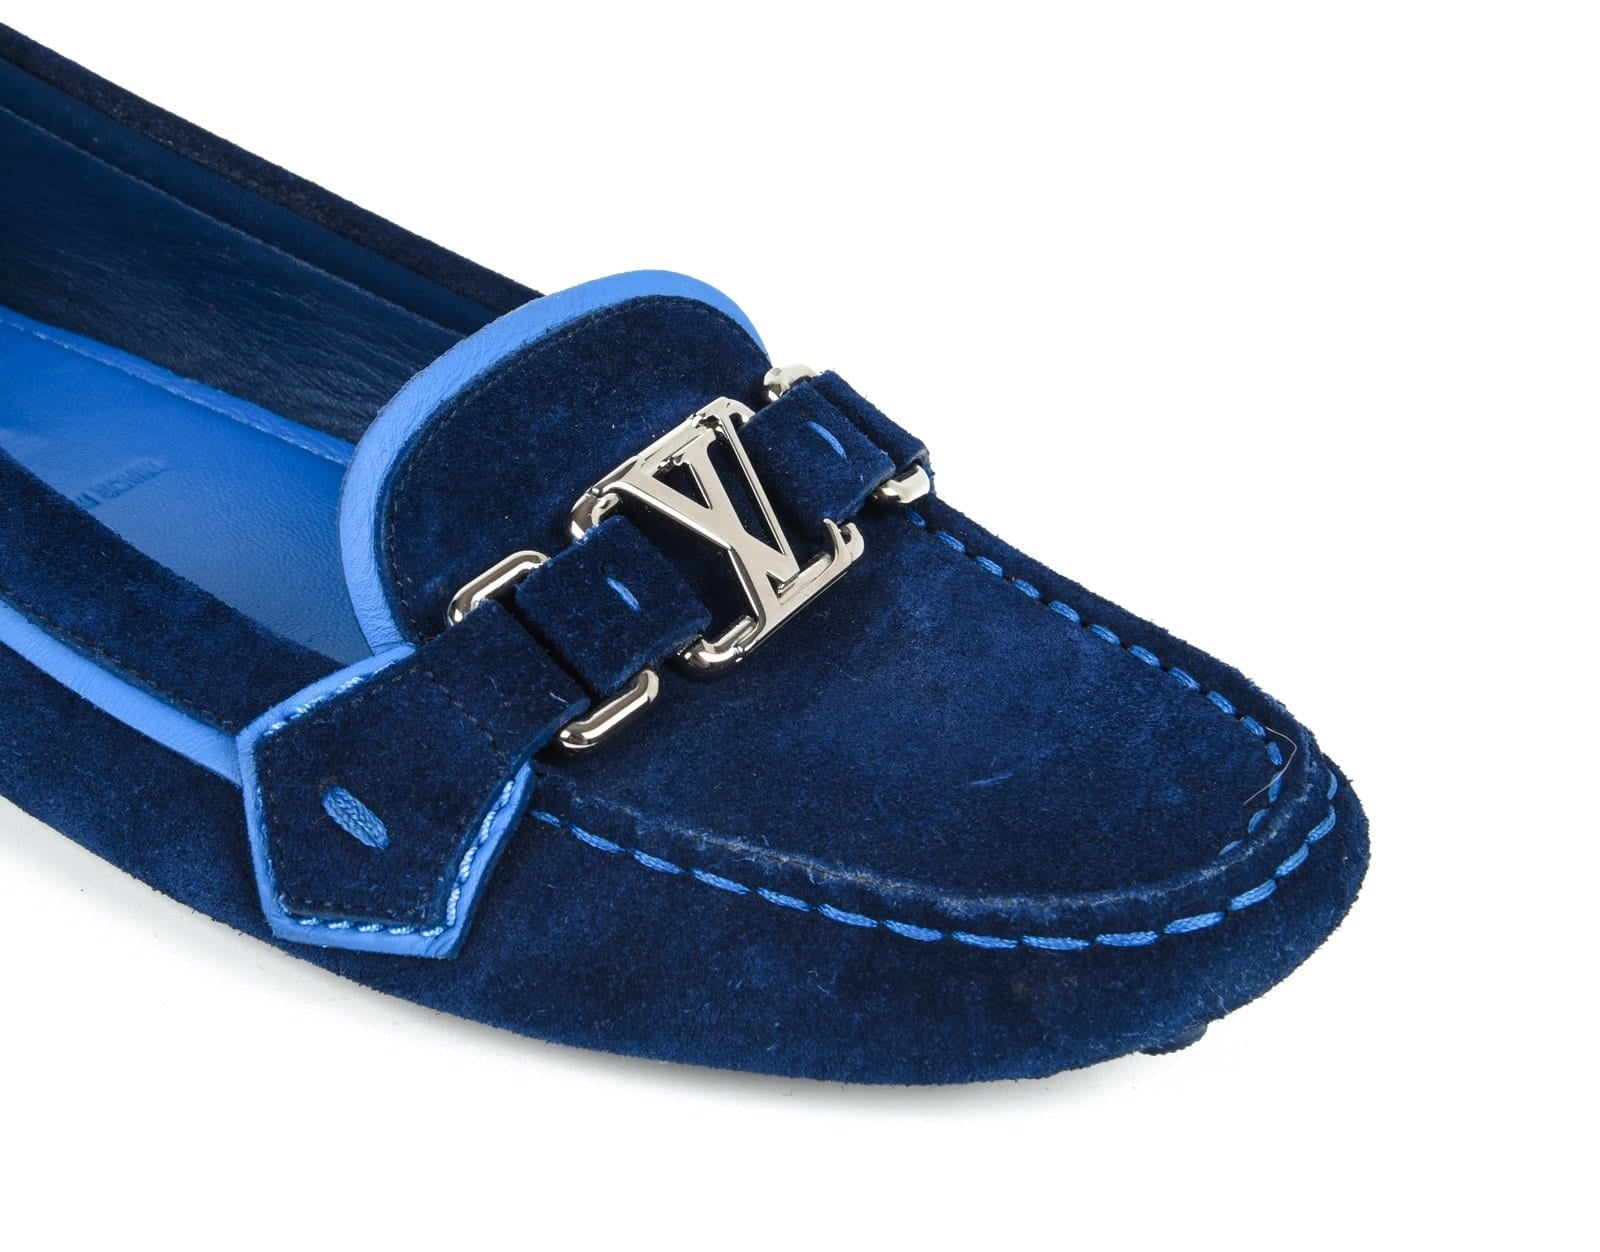 Louis Vuitton Shoe Navy Suede Loafer / Shoe 38.5 8.5 – Mightychic